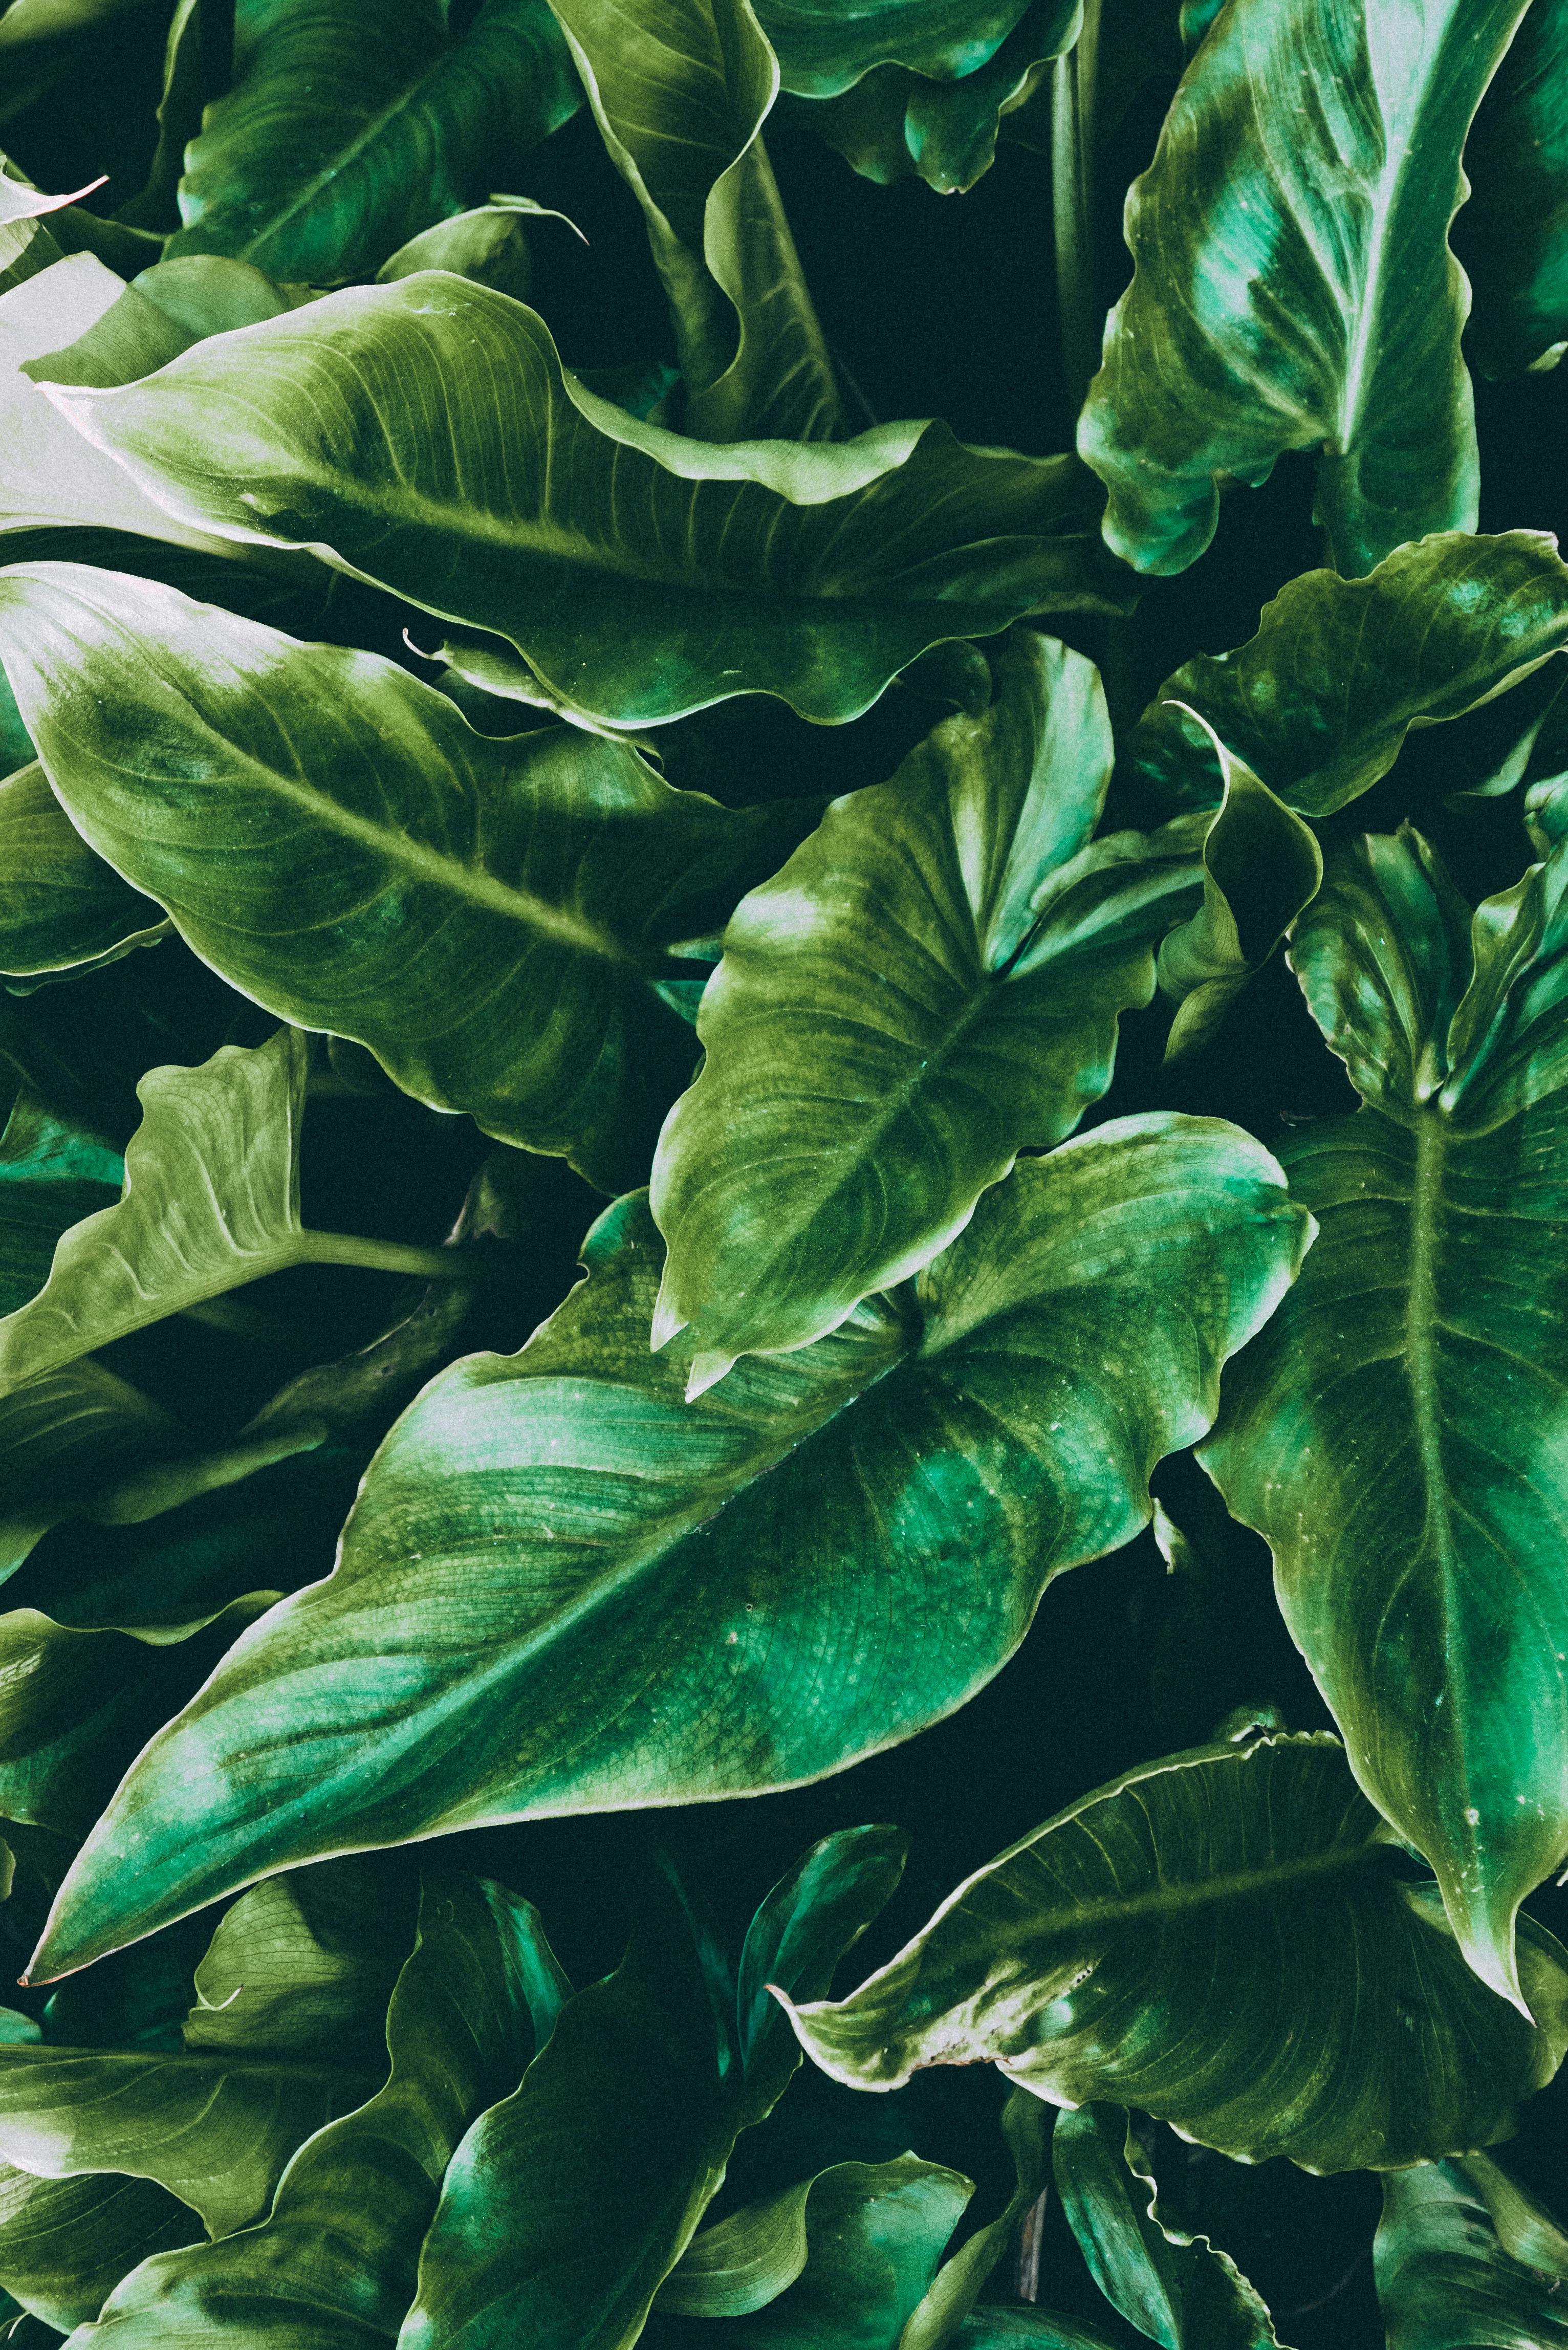 Tropical Leaves | WALLPAPER - Grafico Group